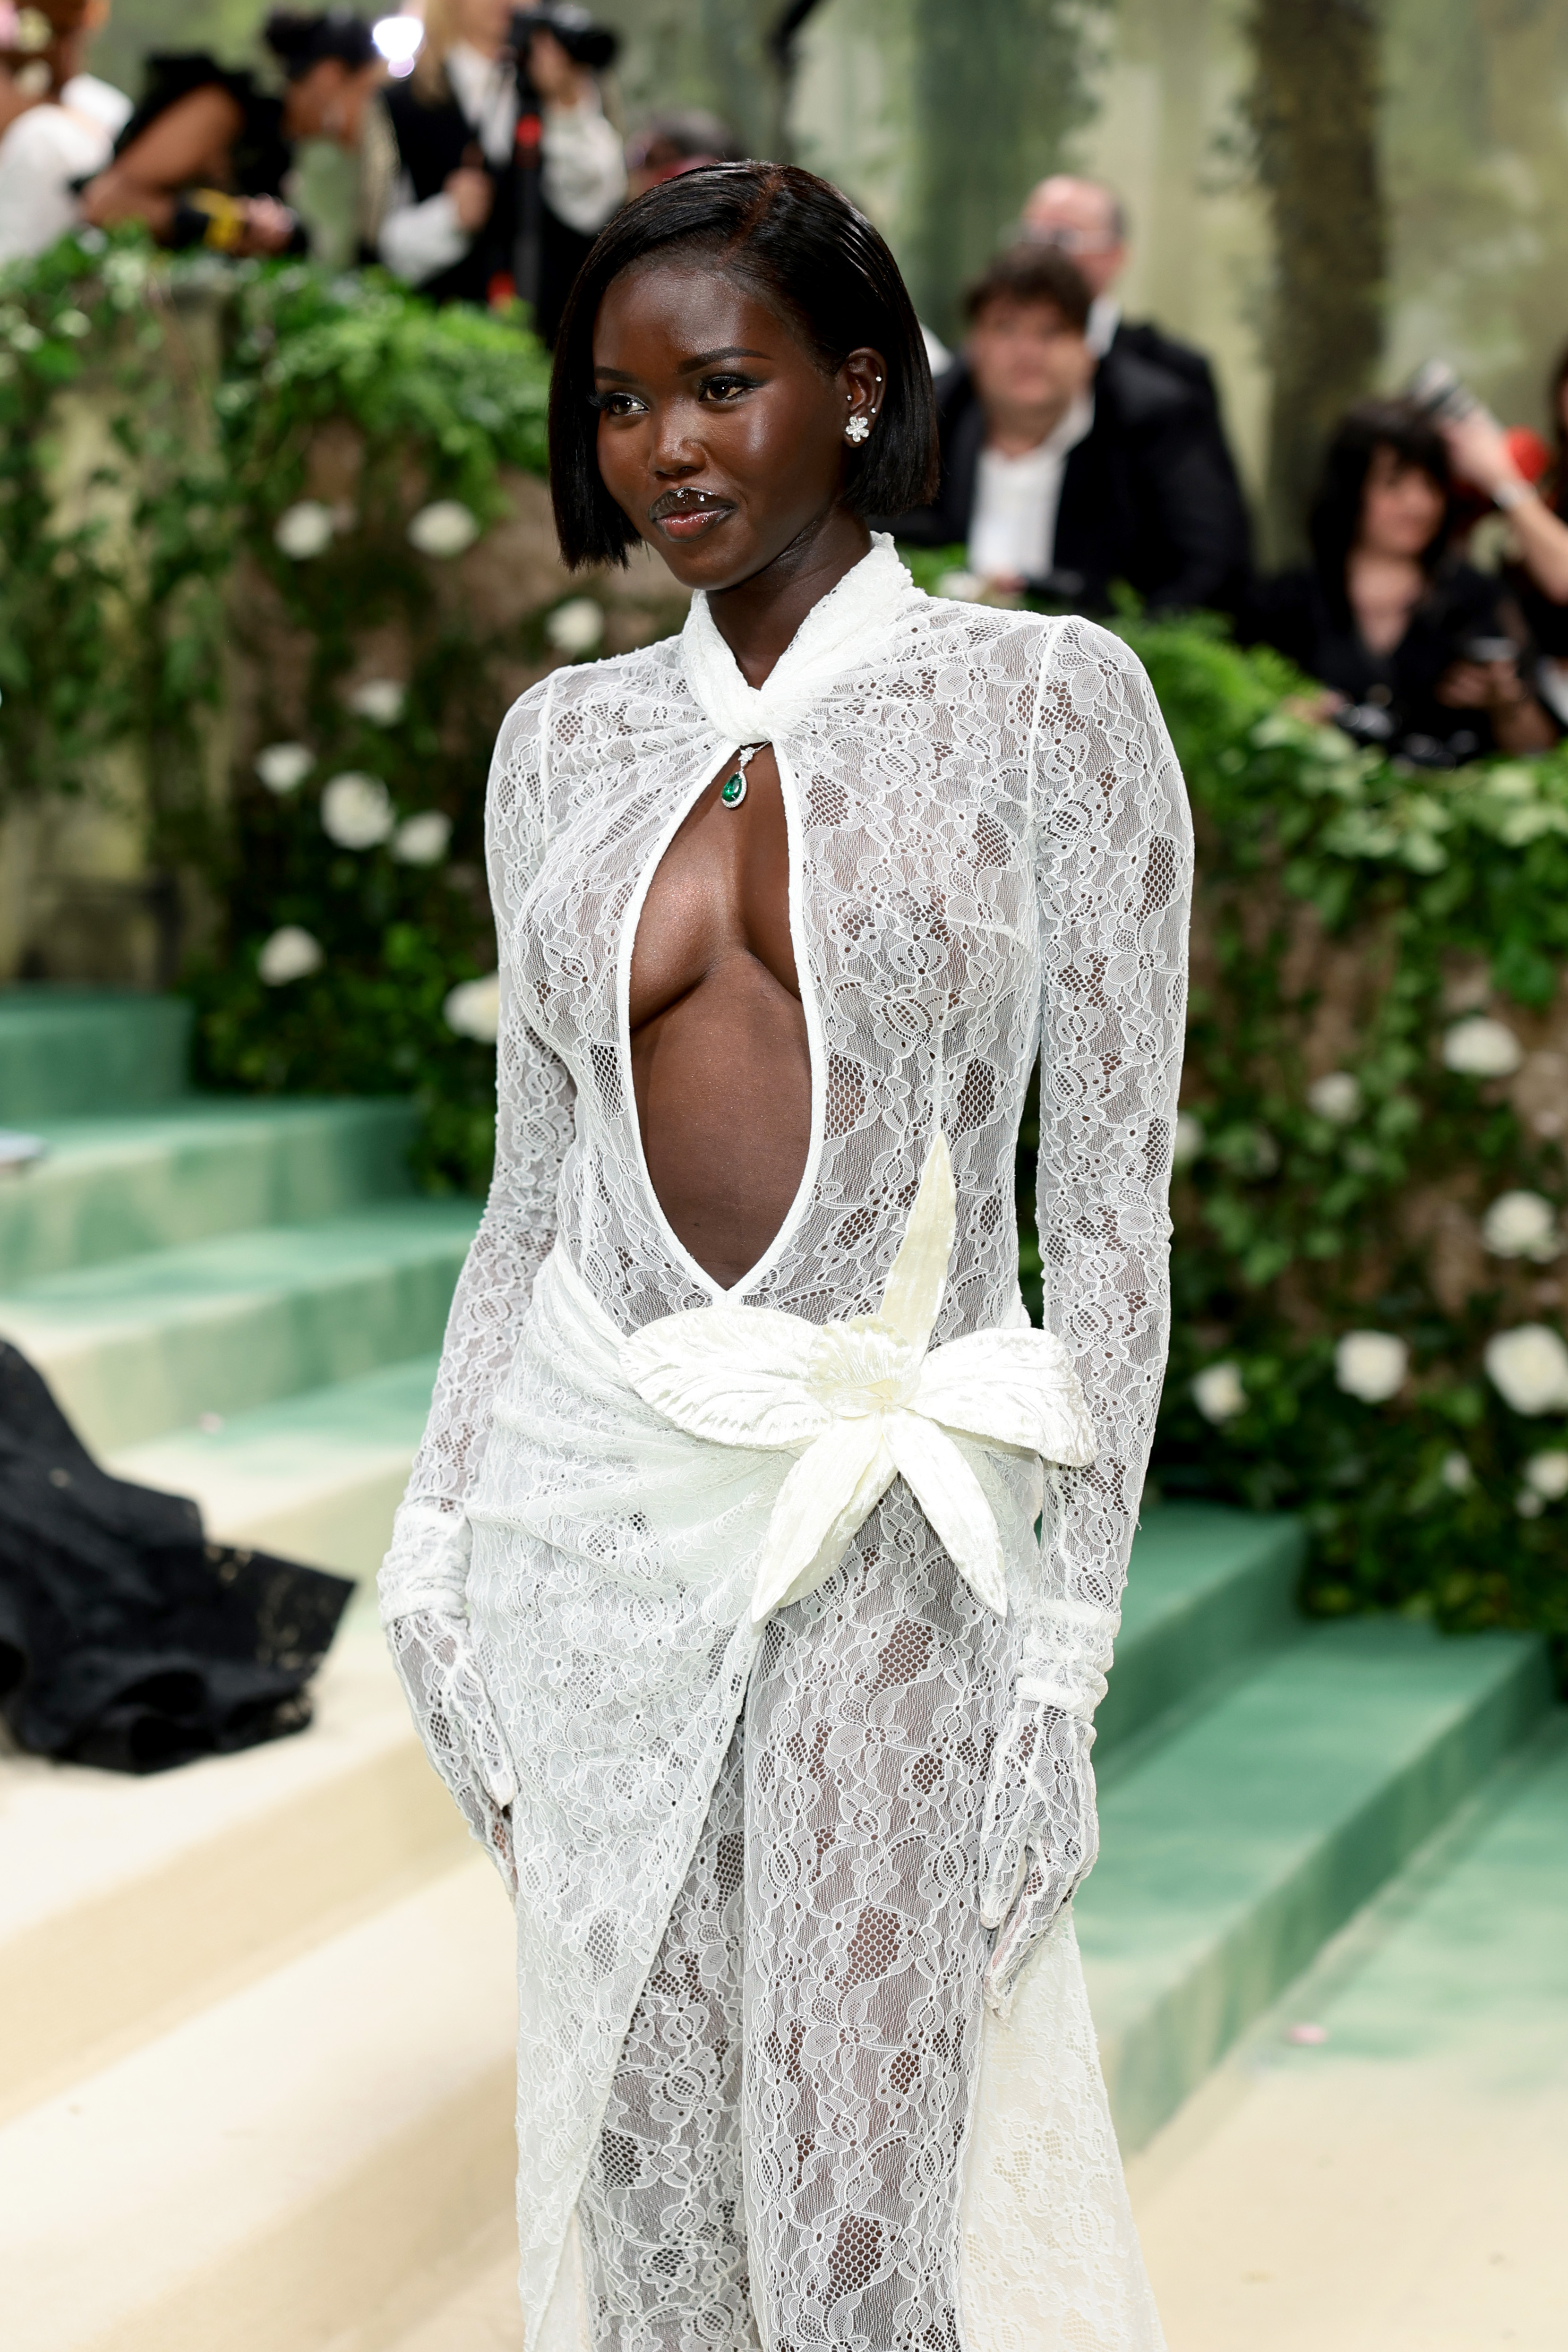 Adut Akech attends The Met Gala in a lacy white dress at The Metropolitan Museum of Art on May 6